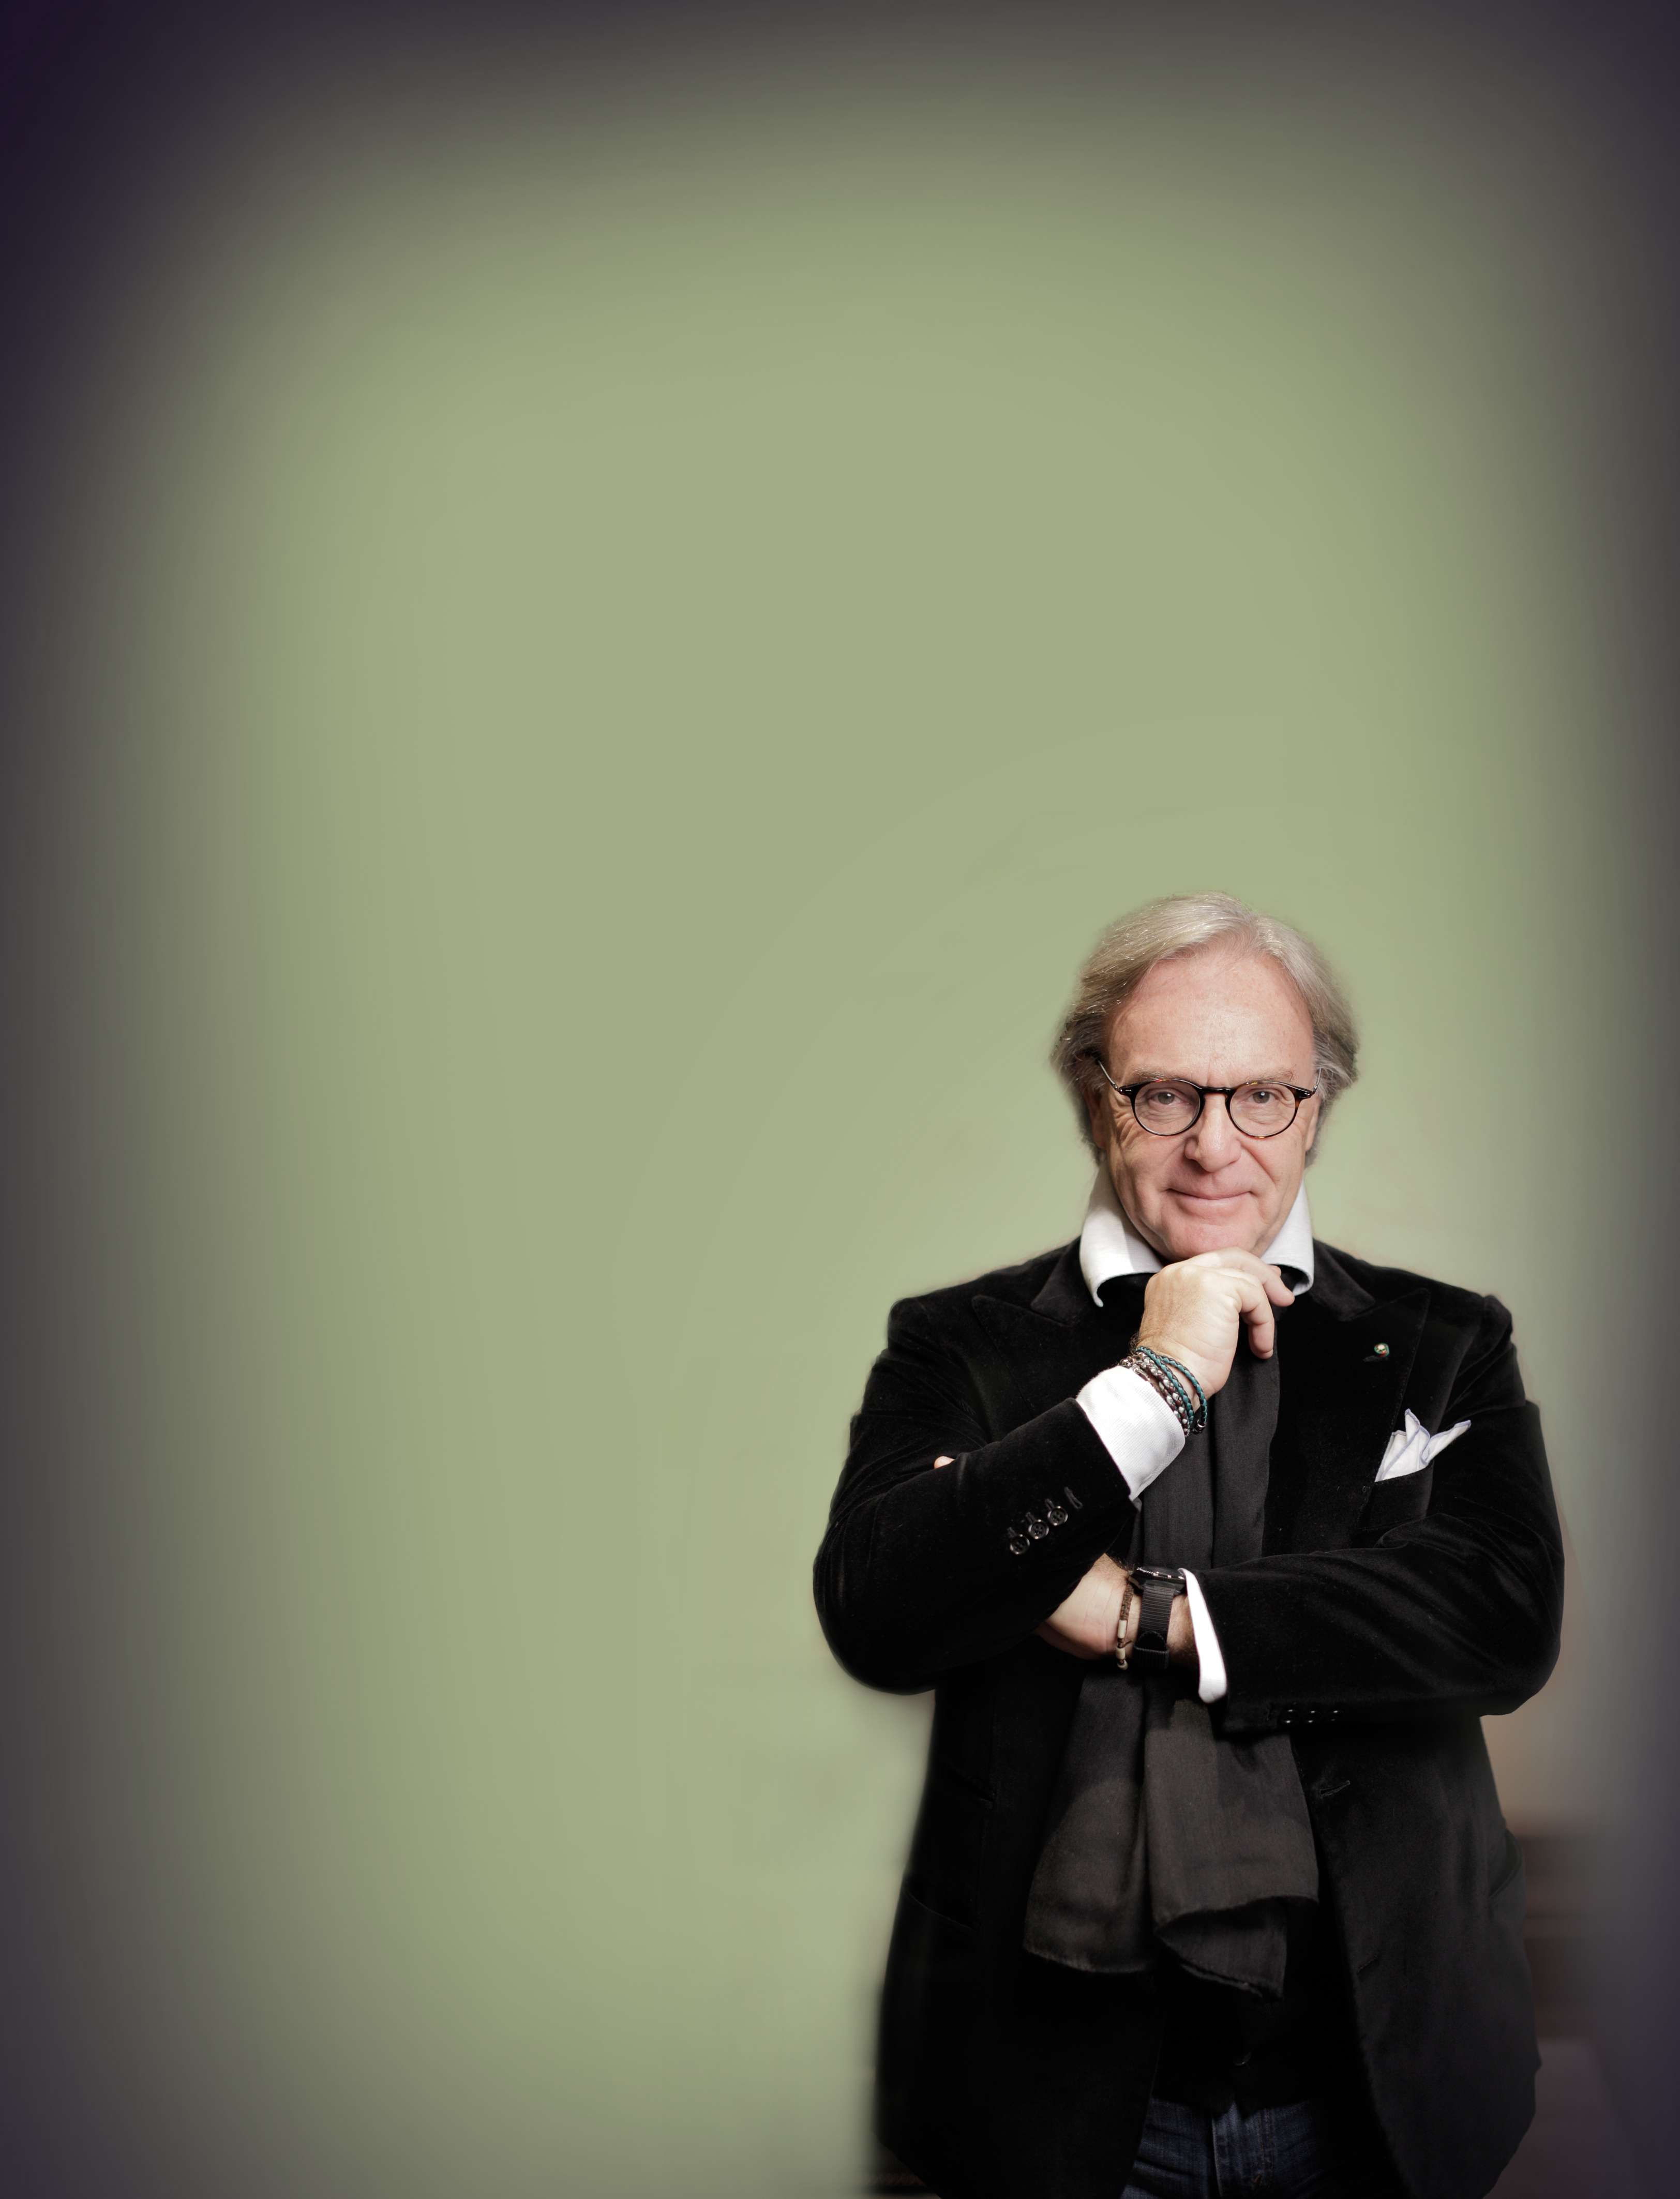 Tod's boss Diego Della Valle promotes the 'made in Italy' ideal